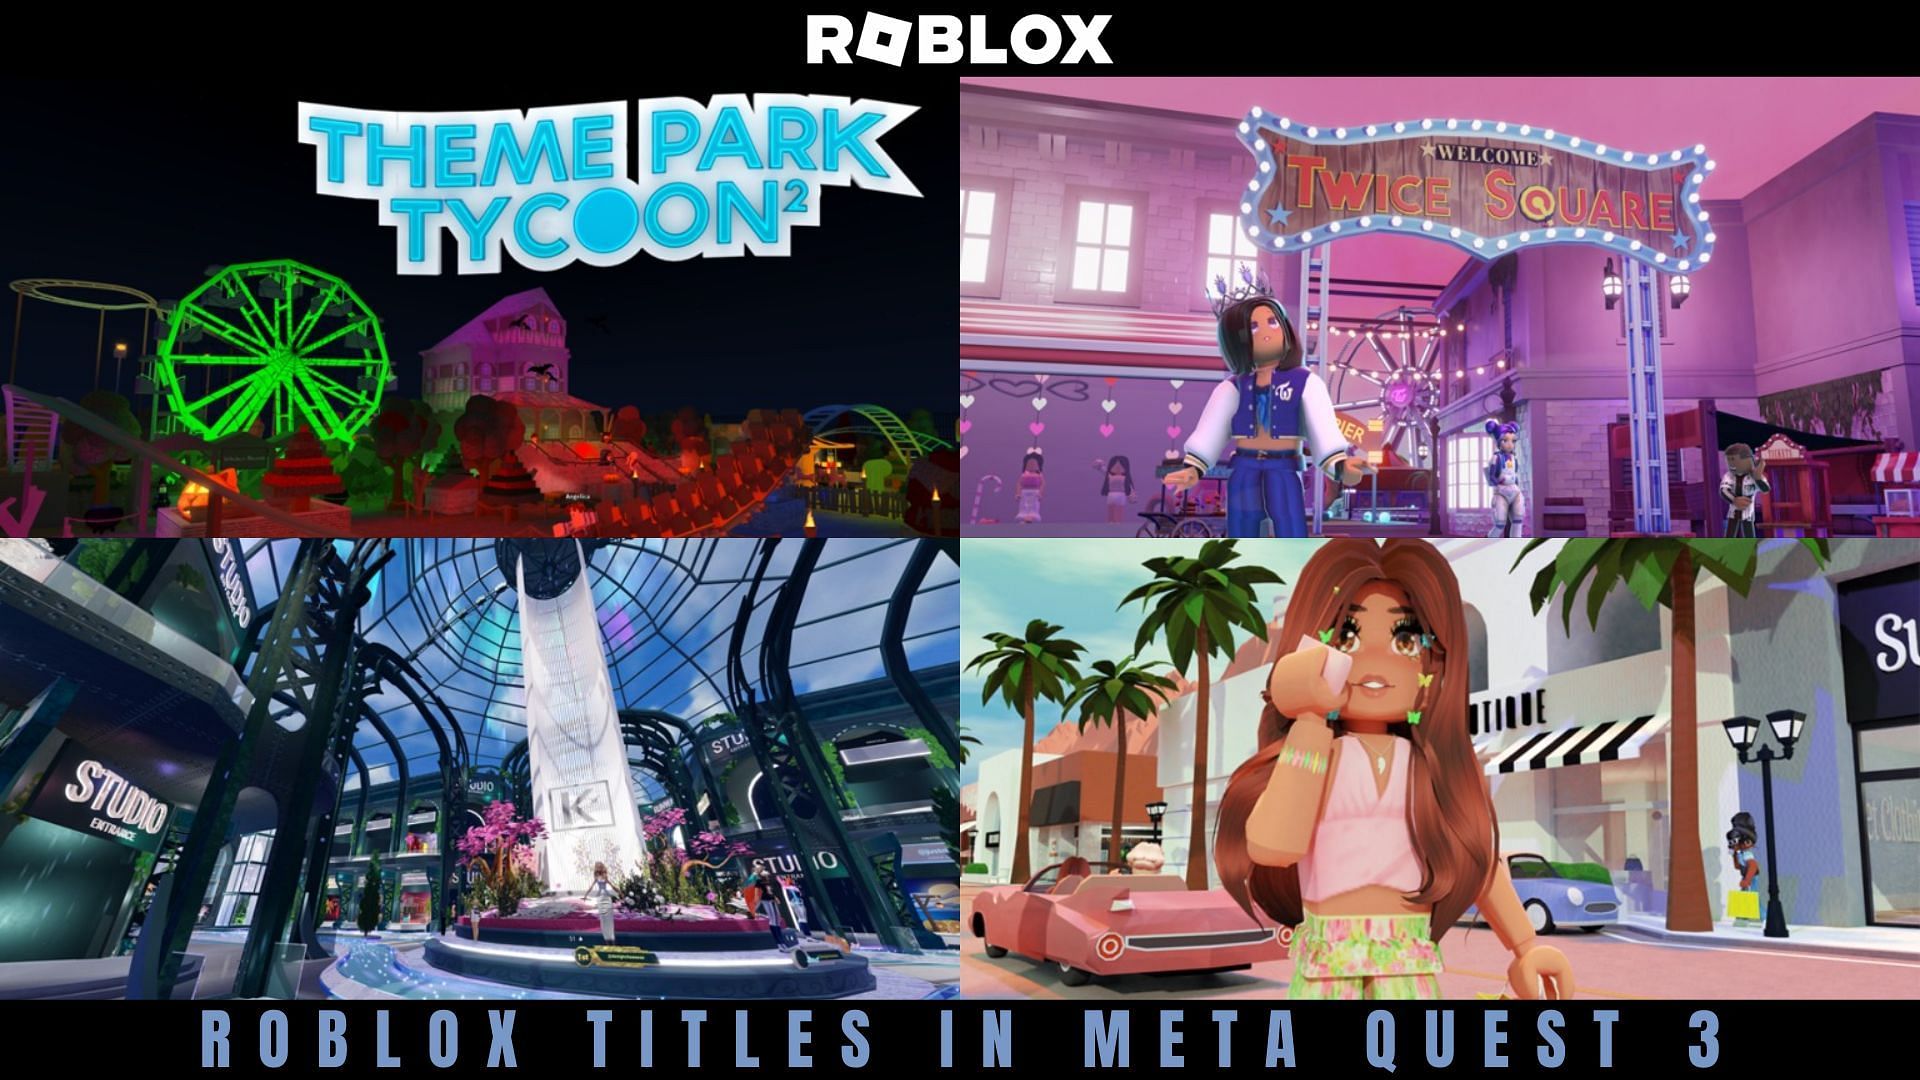 Roblox is coming to Meta Quest! - Announcements - Developer Forum